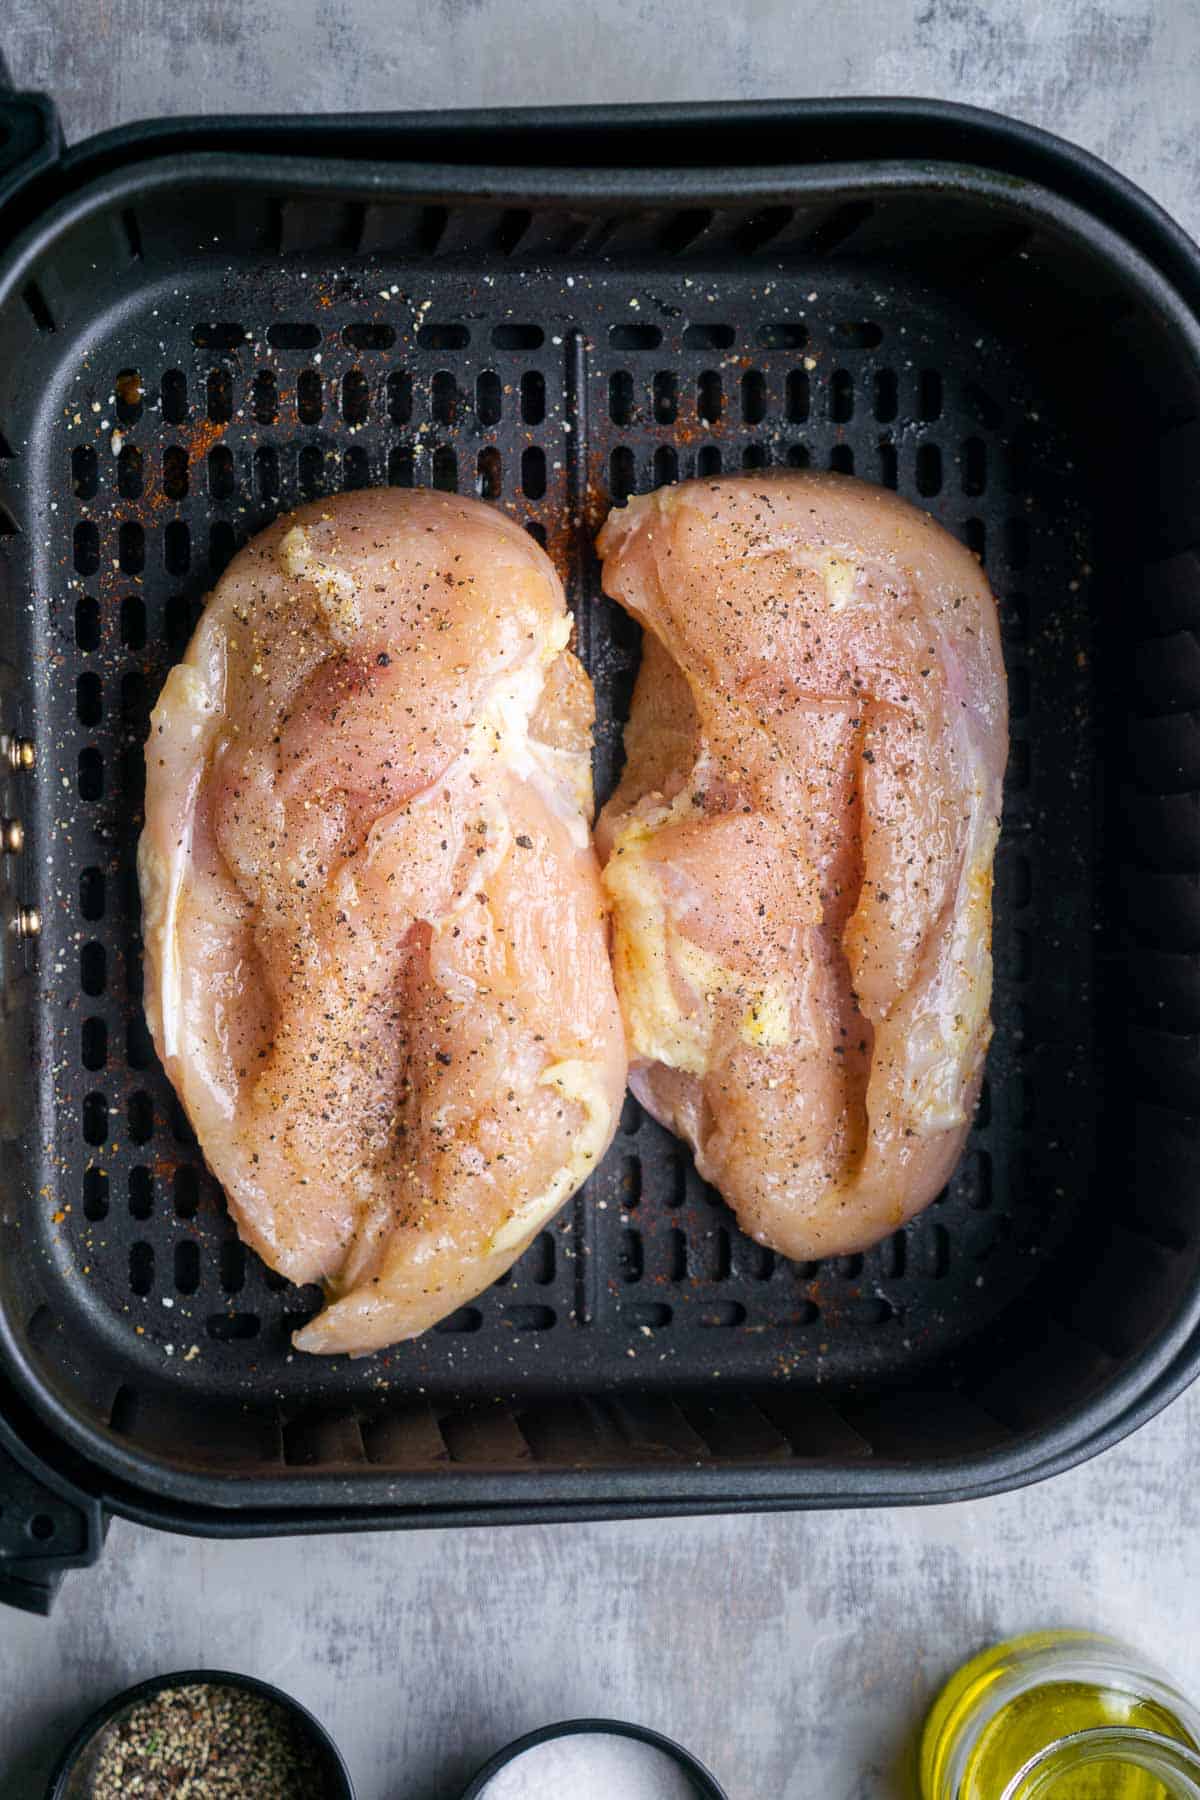 Two uncooked chicken breasts in air fryer basket